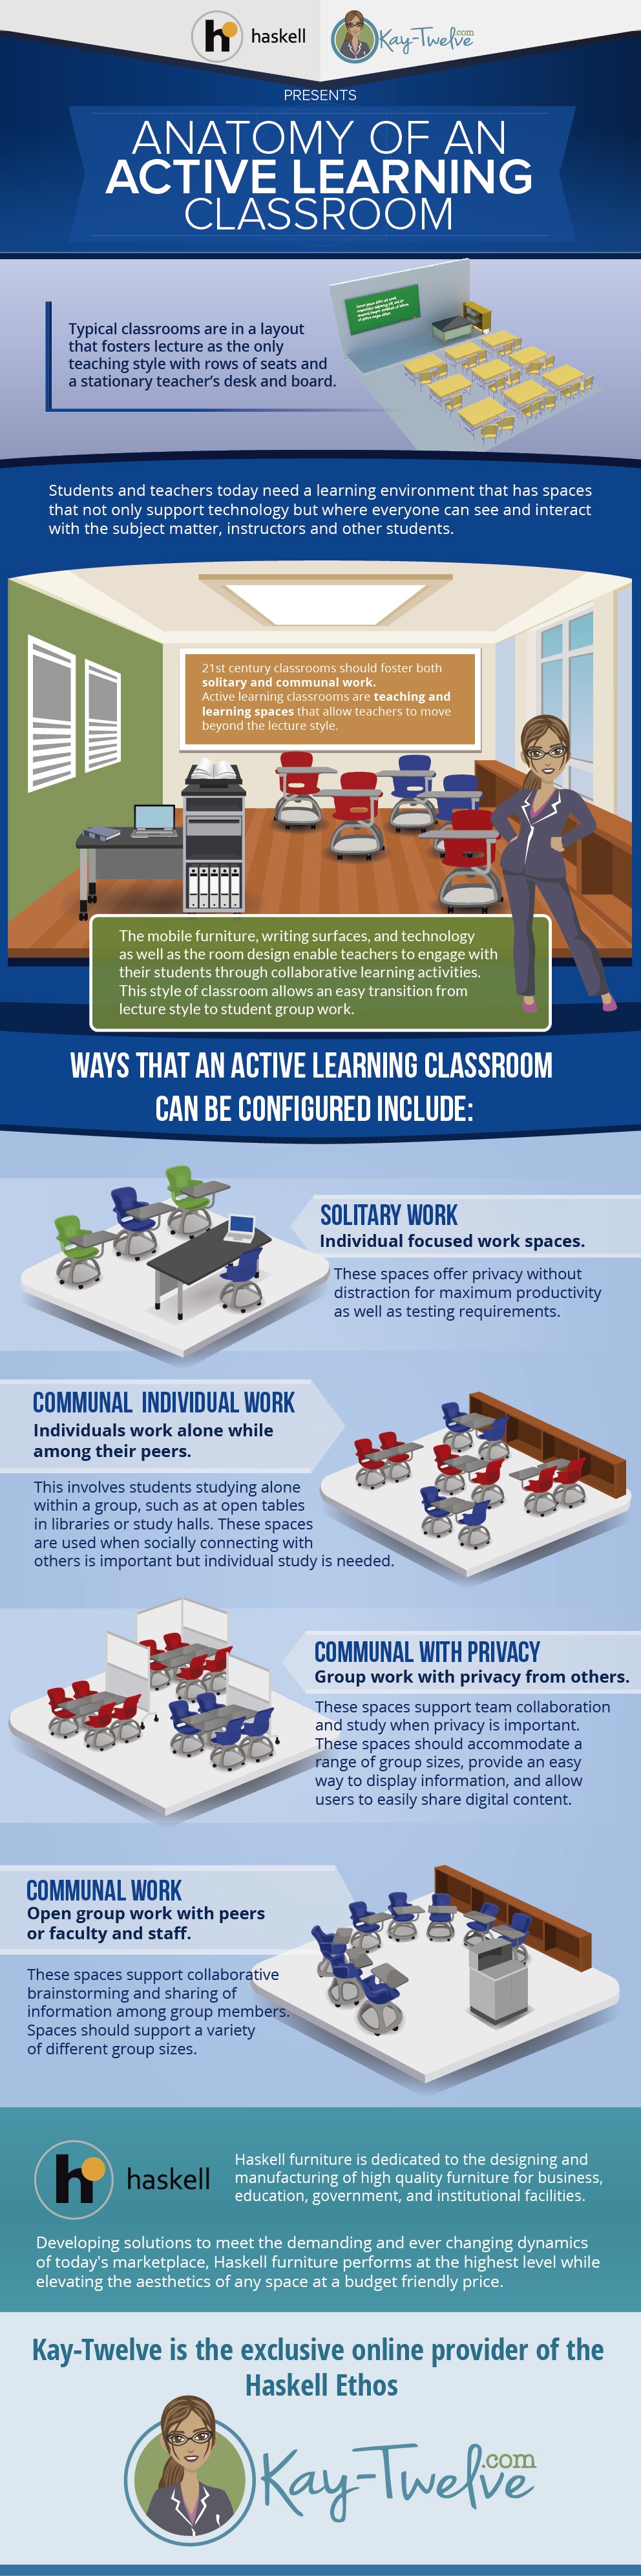 Anatomy of an Active Learning Classroom Infographic